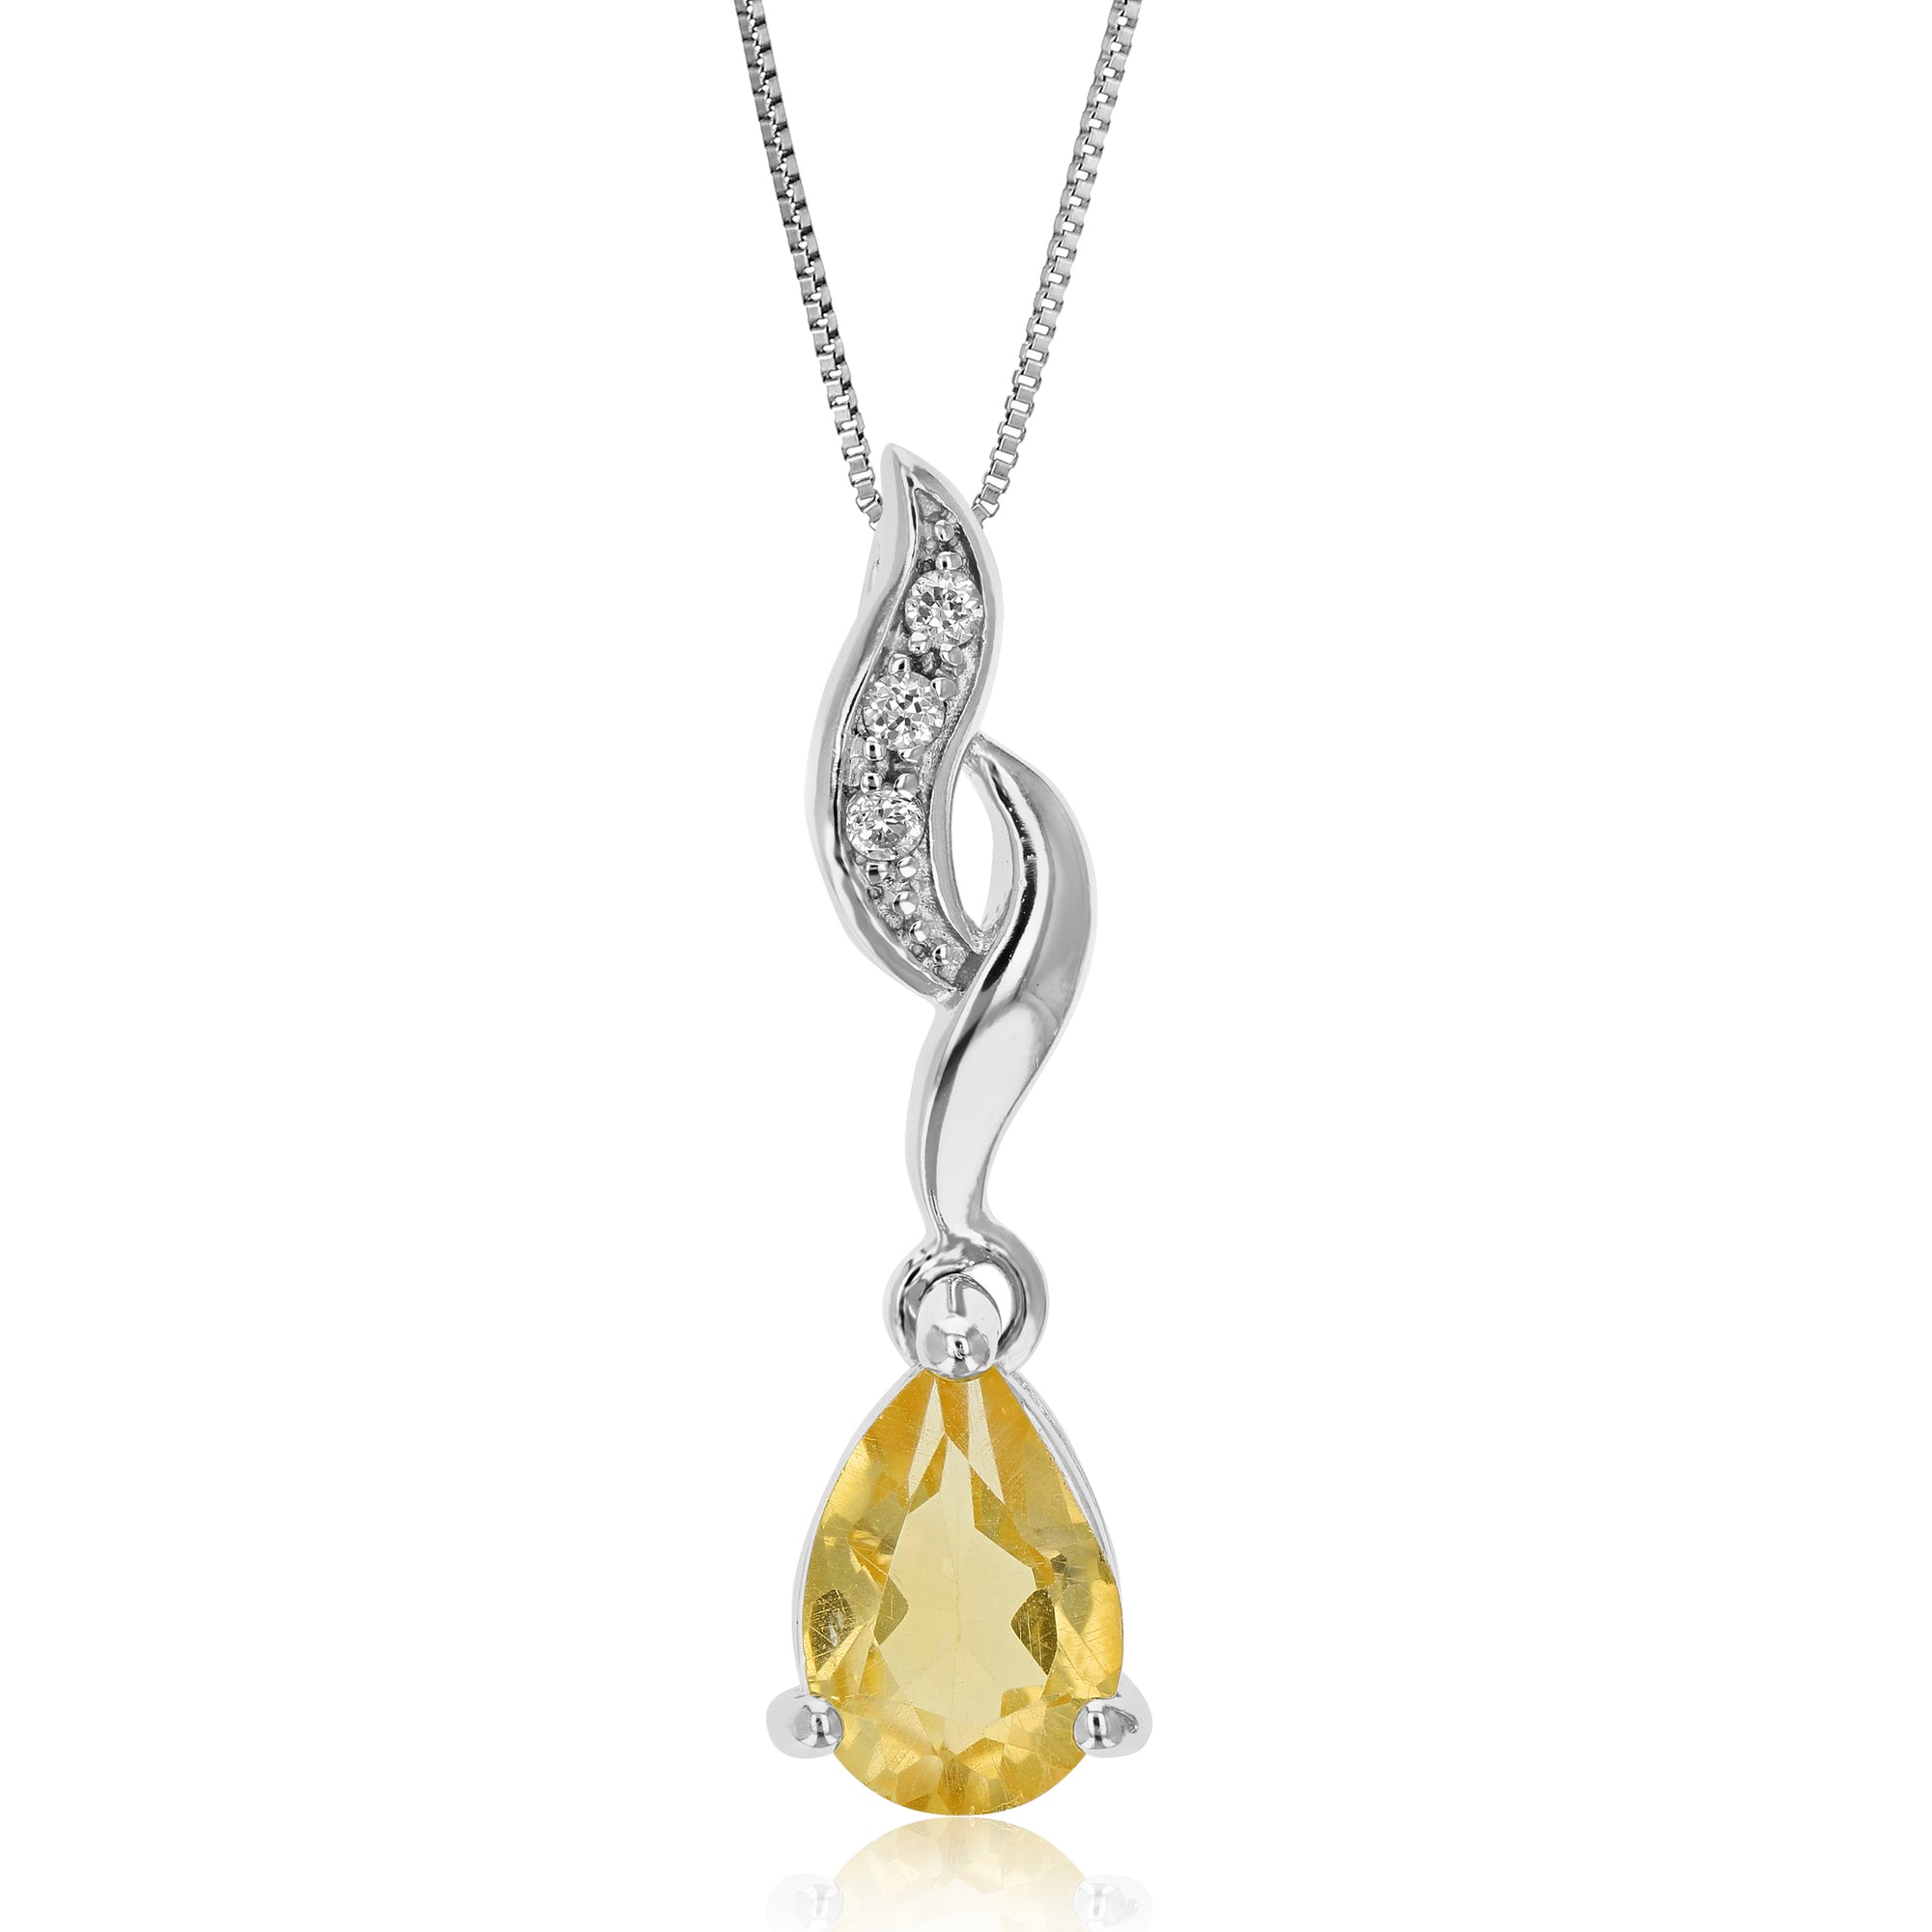 0.80 cttw Pendant Necklace, Citrine Pear Shape Pendant Necklace for Women in .925 Sterling Silver with Rhodium, 18 Inch Chain, Prong Setting